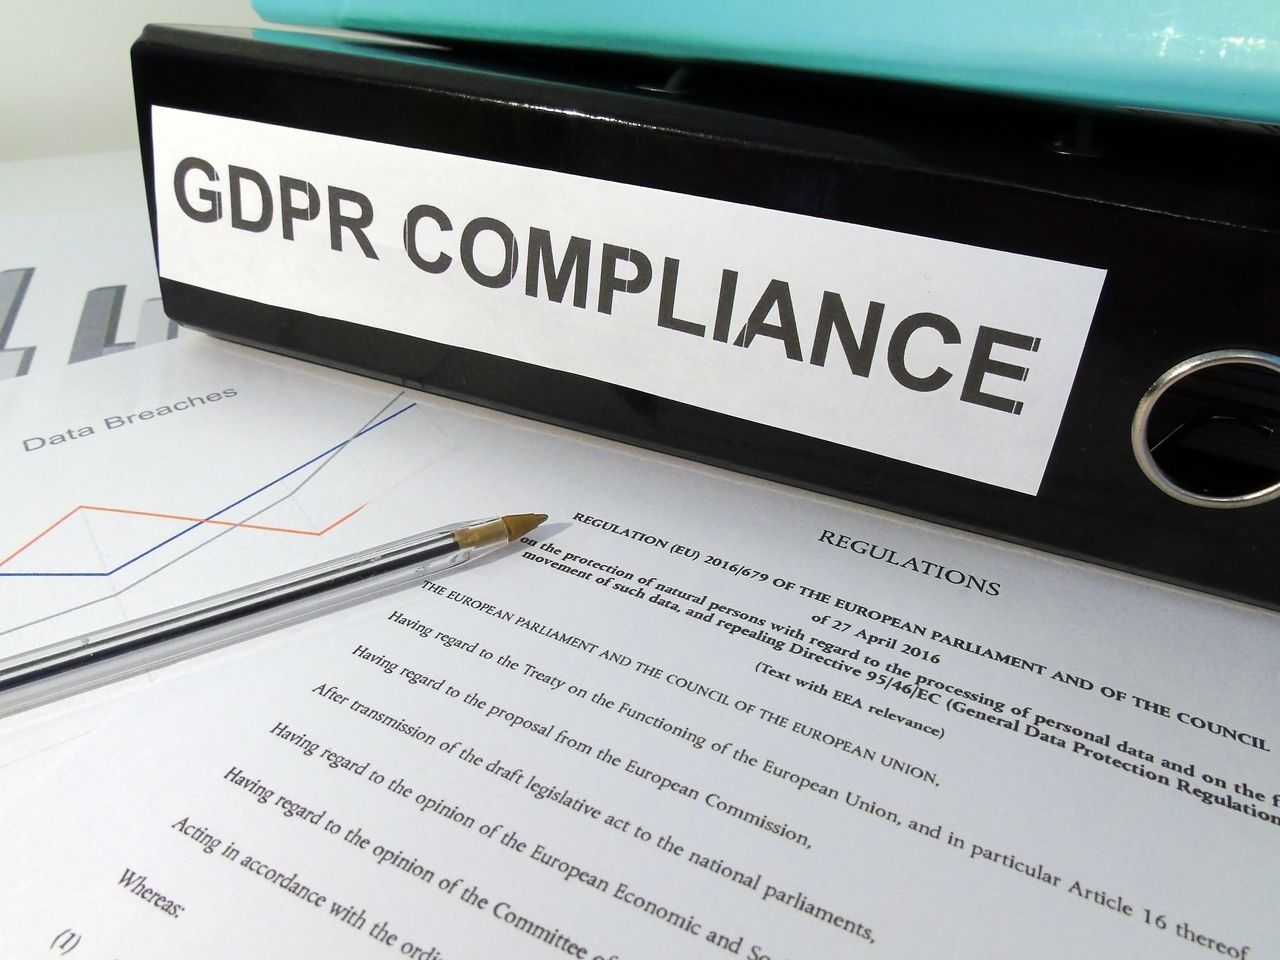 GDPR compliance has cost time and money, but the EU thinks the public will benefit